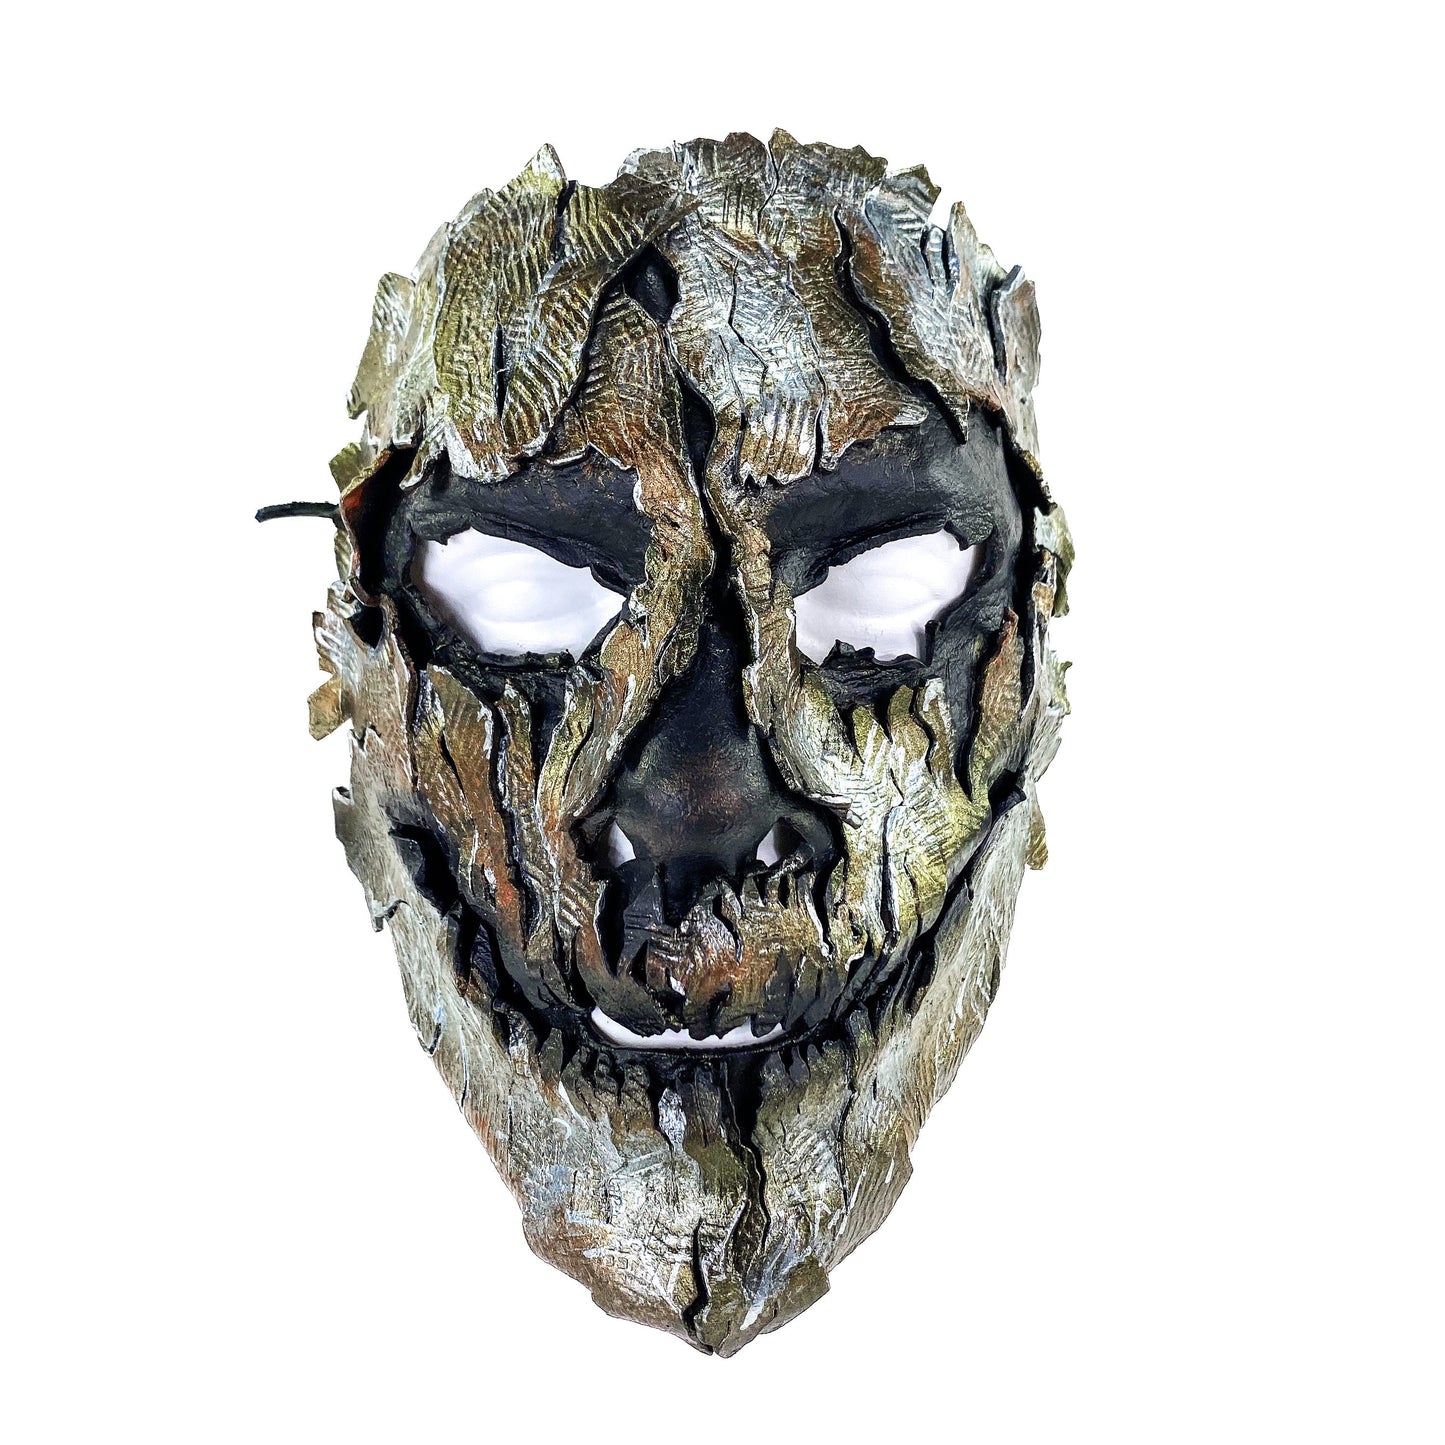 Genuine Leather Mask - Shattered Metal Paint - Handmade Full Face Cover for Halloween, Performance or Cosplay Costume